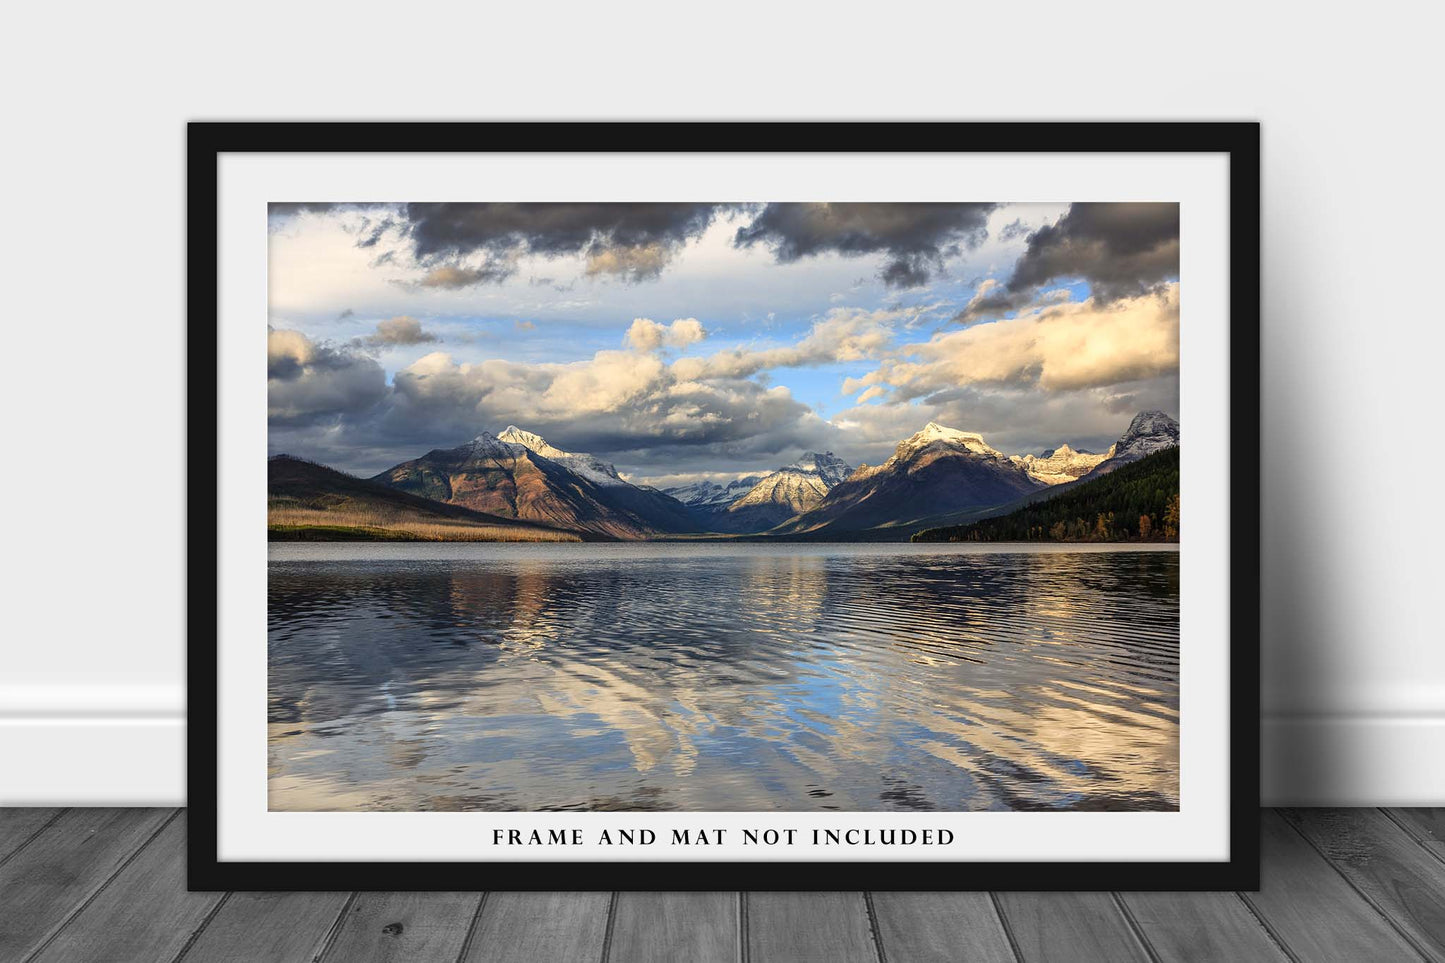 Glacier National Park Photograpy Print (Not Framed) Picture of Snowy Peaks at Lake McDonald on Autumn Day in Montana Rocky Mountain Wall Art Nature Decor